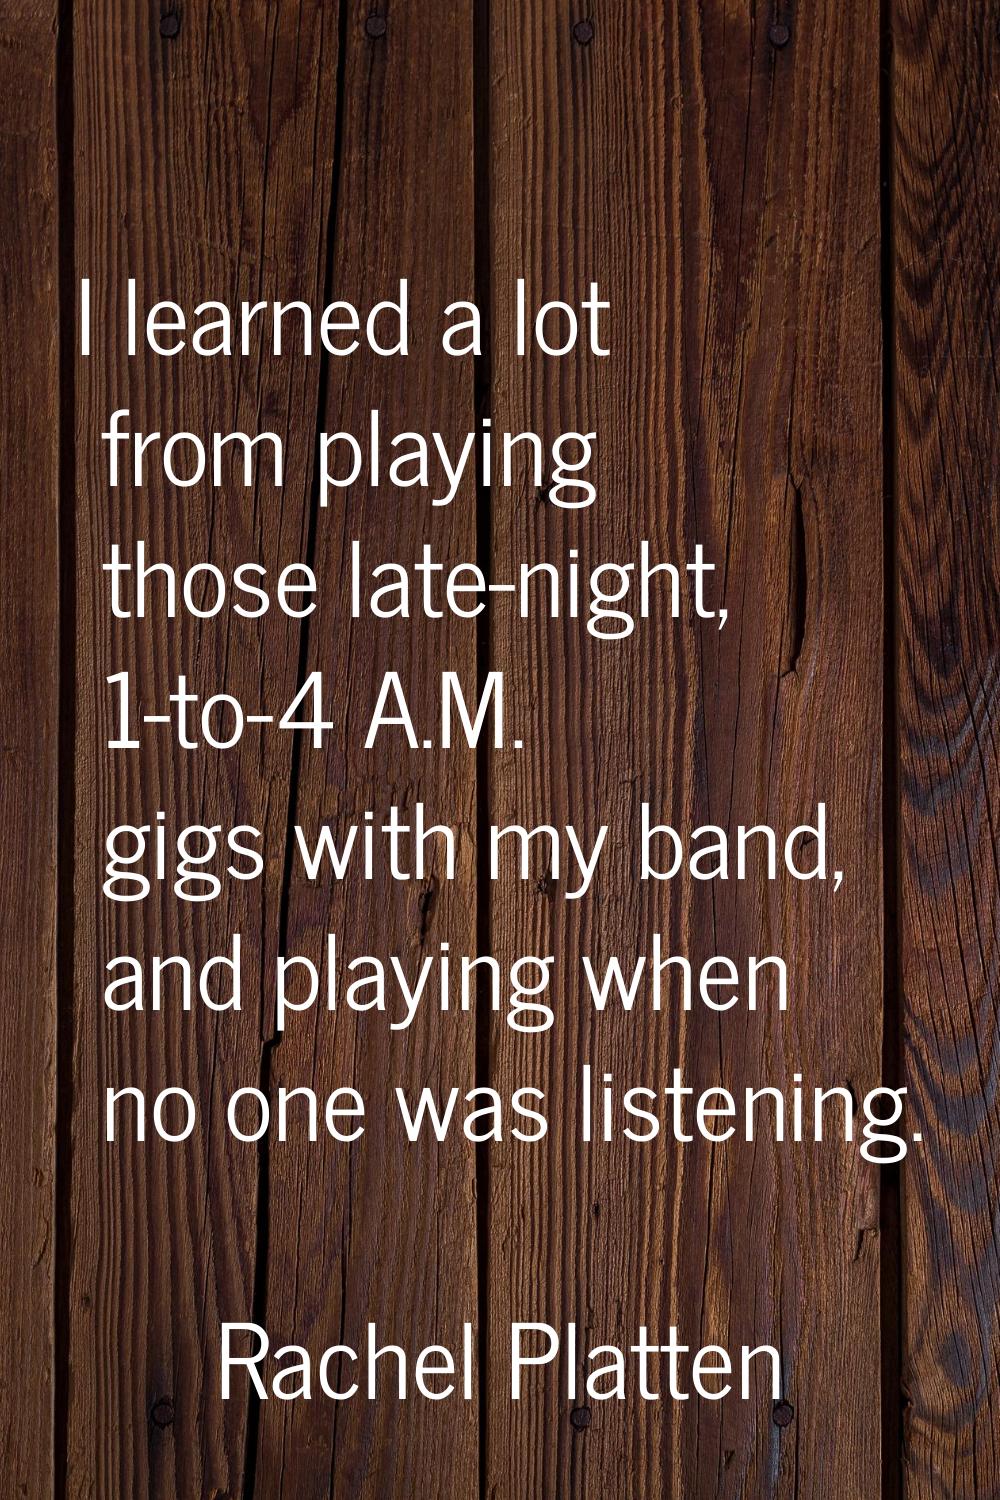 I learned a lot from playing those late-night, 1-to-4 A.M. gigs with my band, and playing when no o